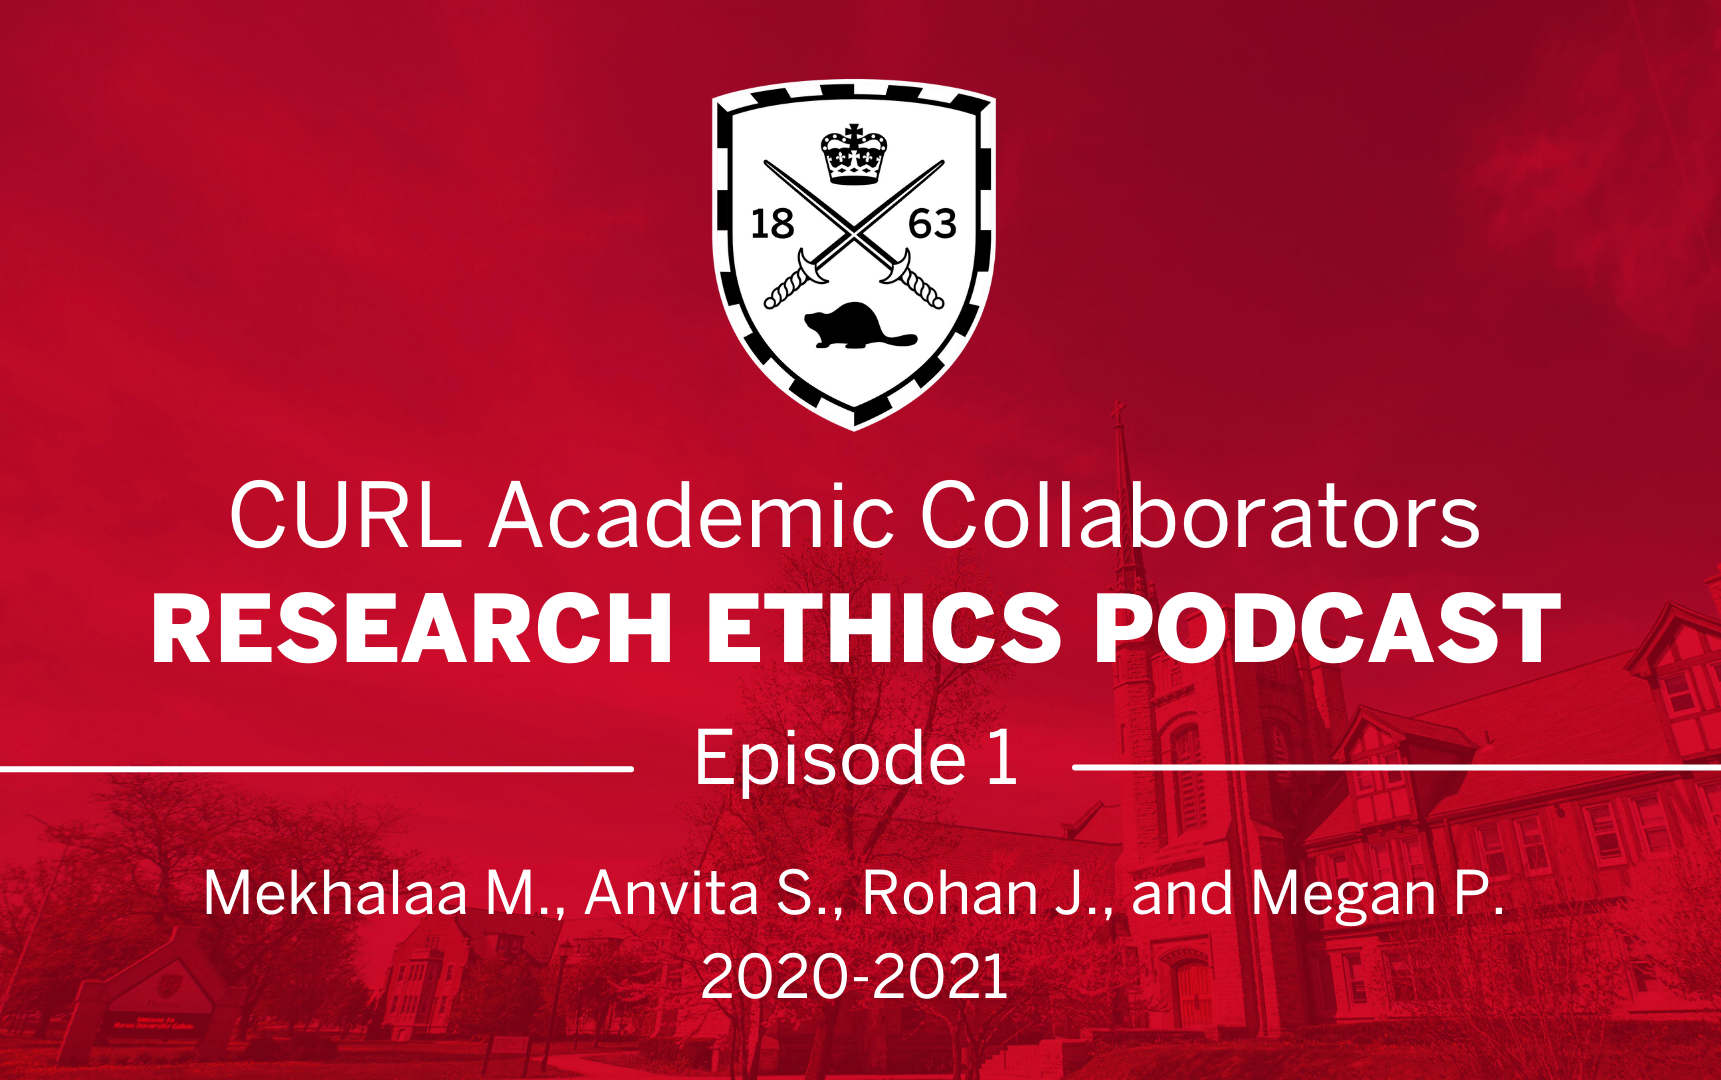 Under a Huron University College Shield logo, text reads, "CURL Academic Collaborators Research Ethics Podcast, Episode 1. By Mekhalaa M., Anvita S., Rohan J., and Megan P. 2020-21"